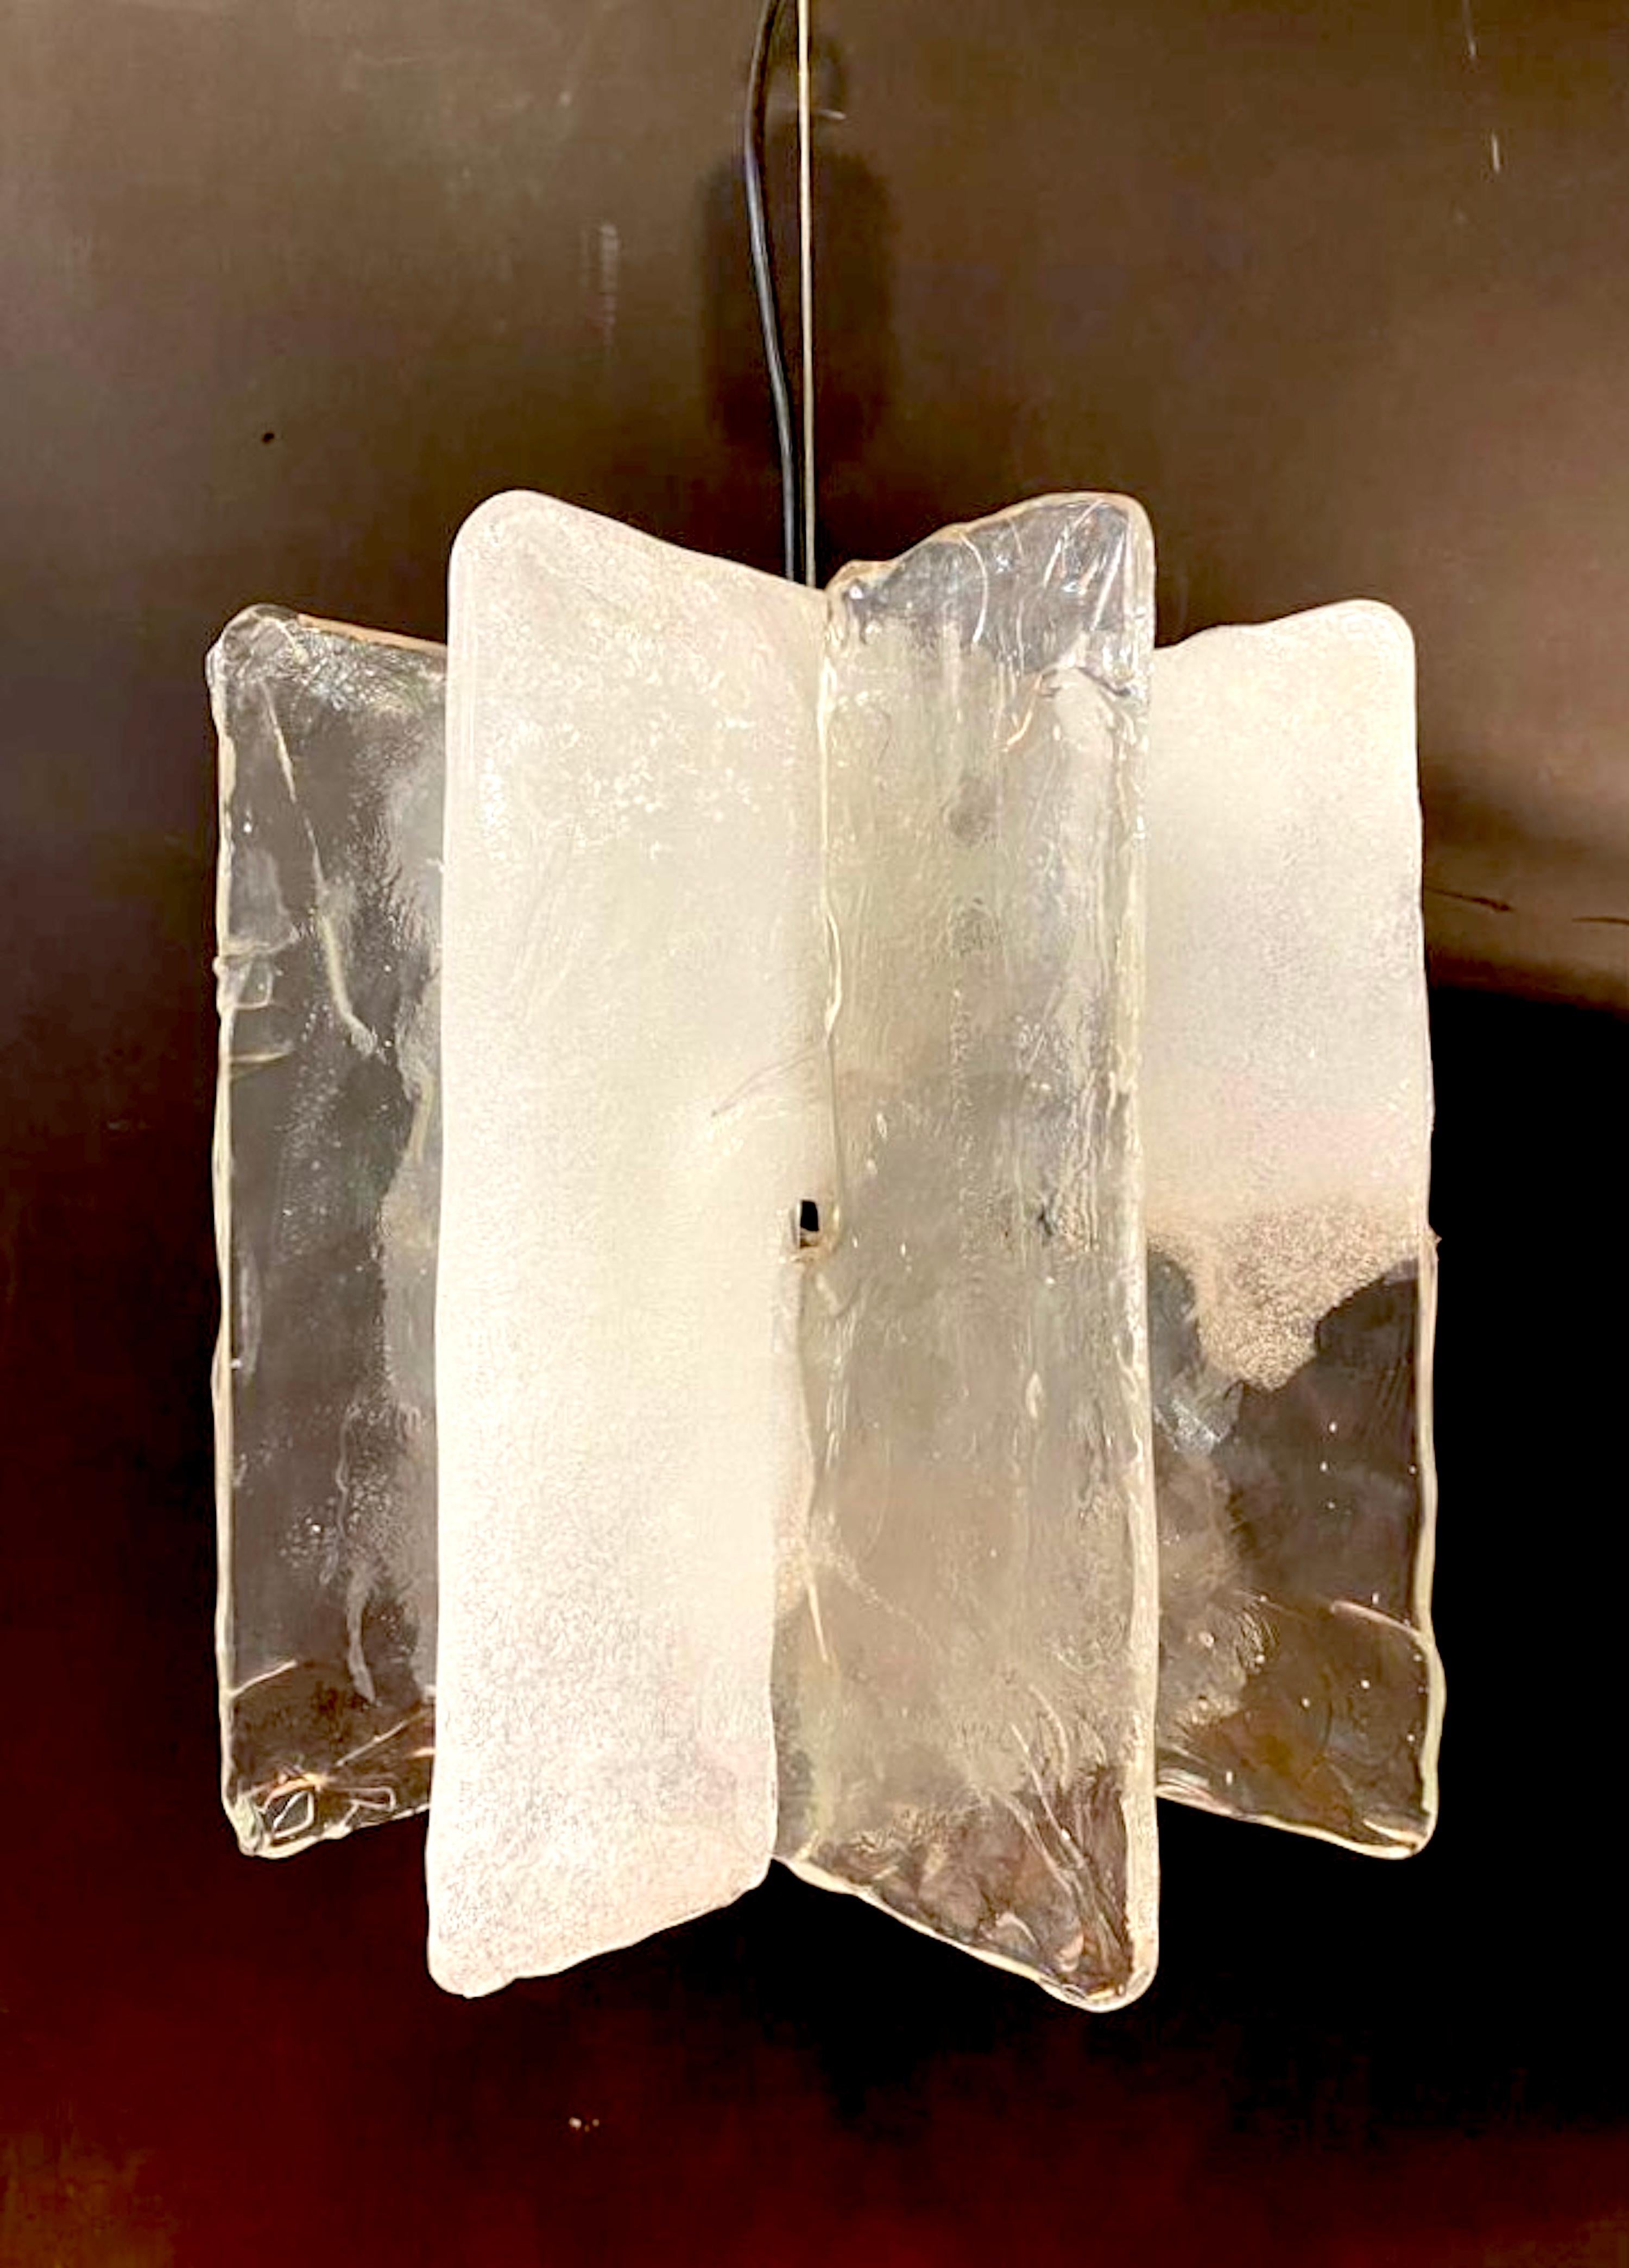 A beautiful 1970s modern design chandelier by noted Italian designer Carlo Nason. Designed and produced for Italian lighting company Mazzega. The chandelier is an elegant and simple design comprised of four hand formed glass panels in clear with